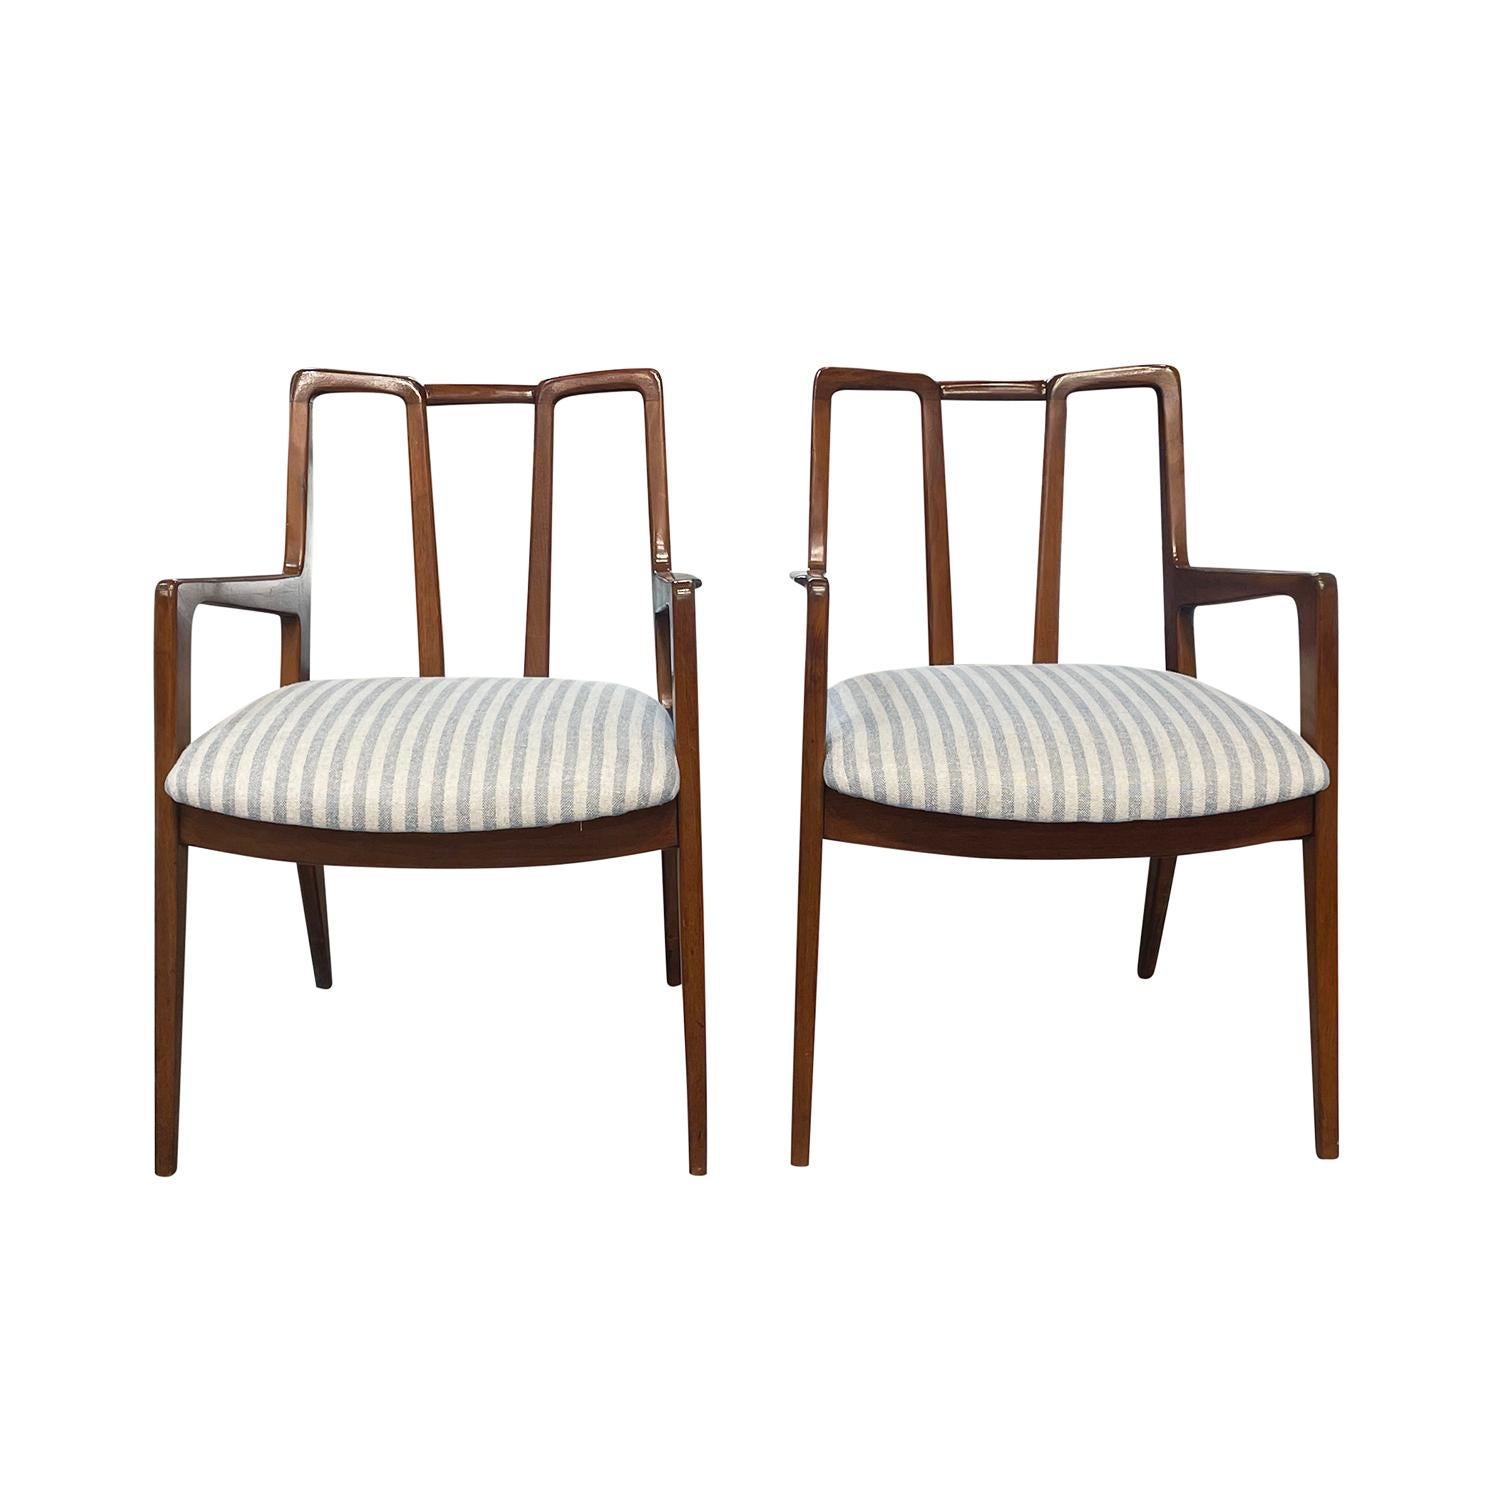 A vintage Mid-Century modern American pair of armchairs made of hand crafted polished Walnut, designed and produced by John Stuart in good condition. The detailed dining room chairs have an open, inclined sculptural backrest with arched arms,